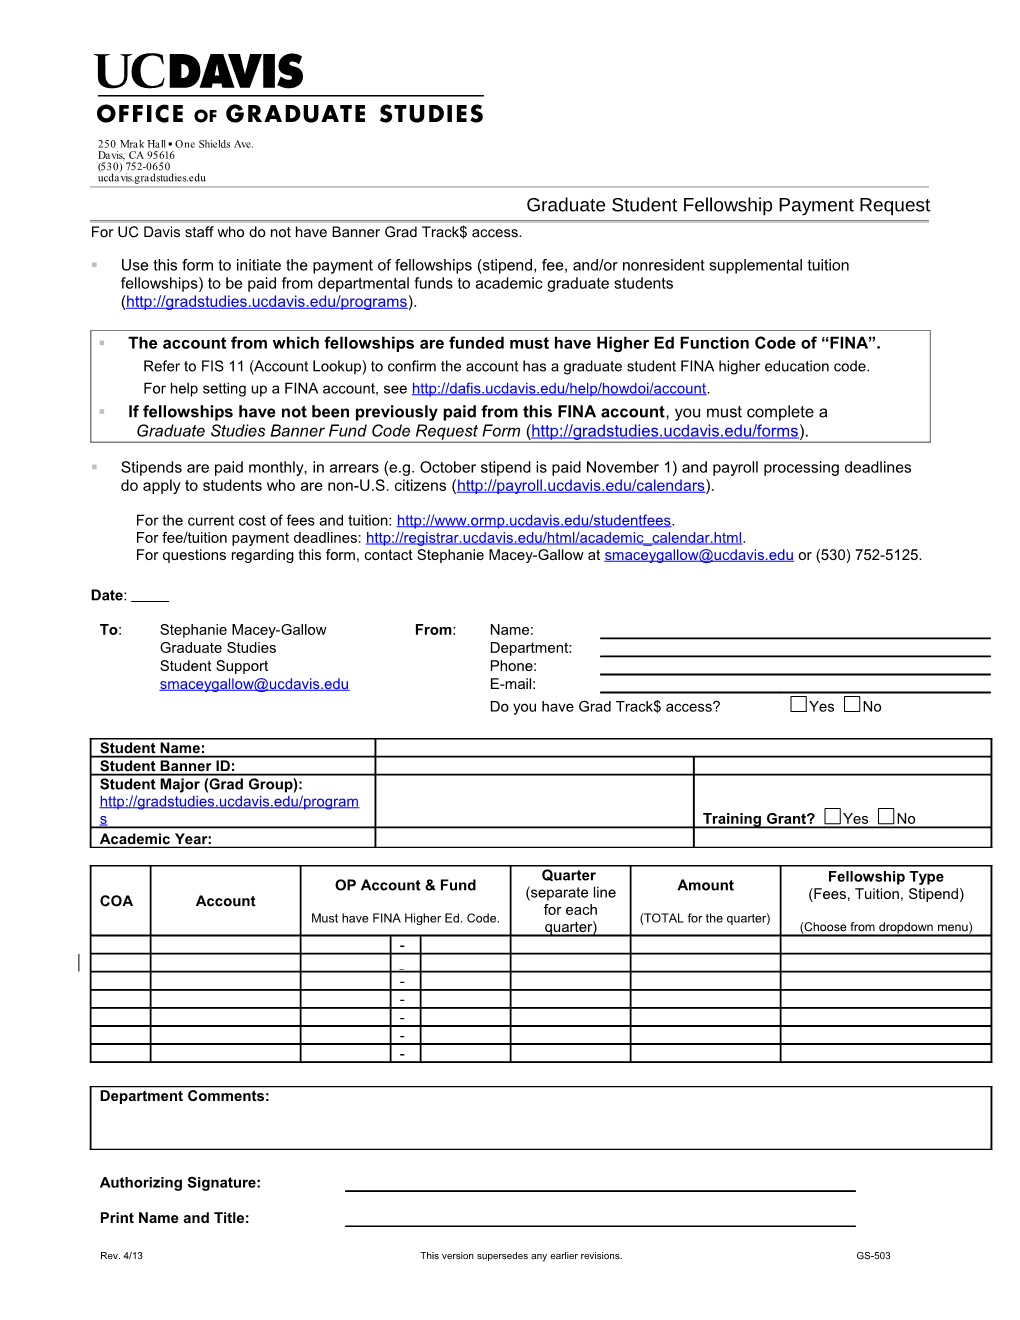 Graduate Student Fellowship Payment Request